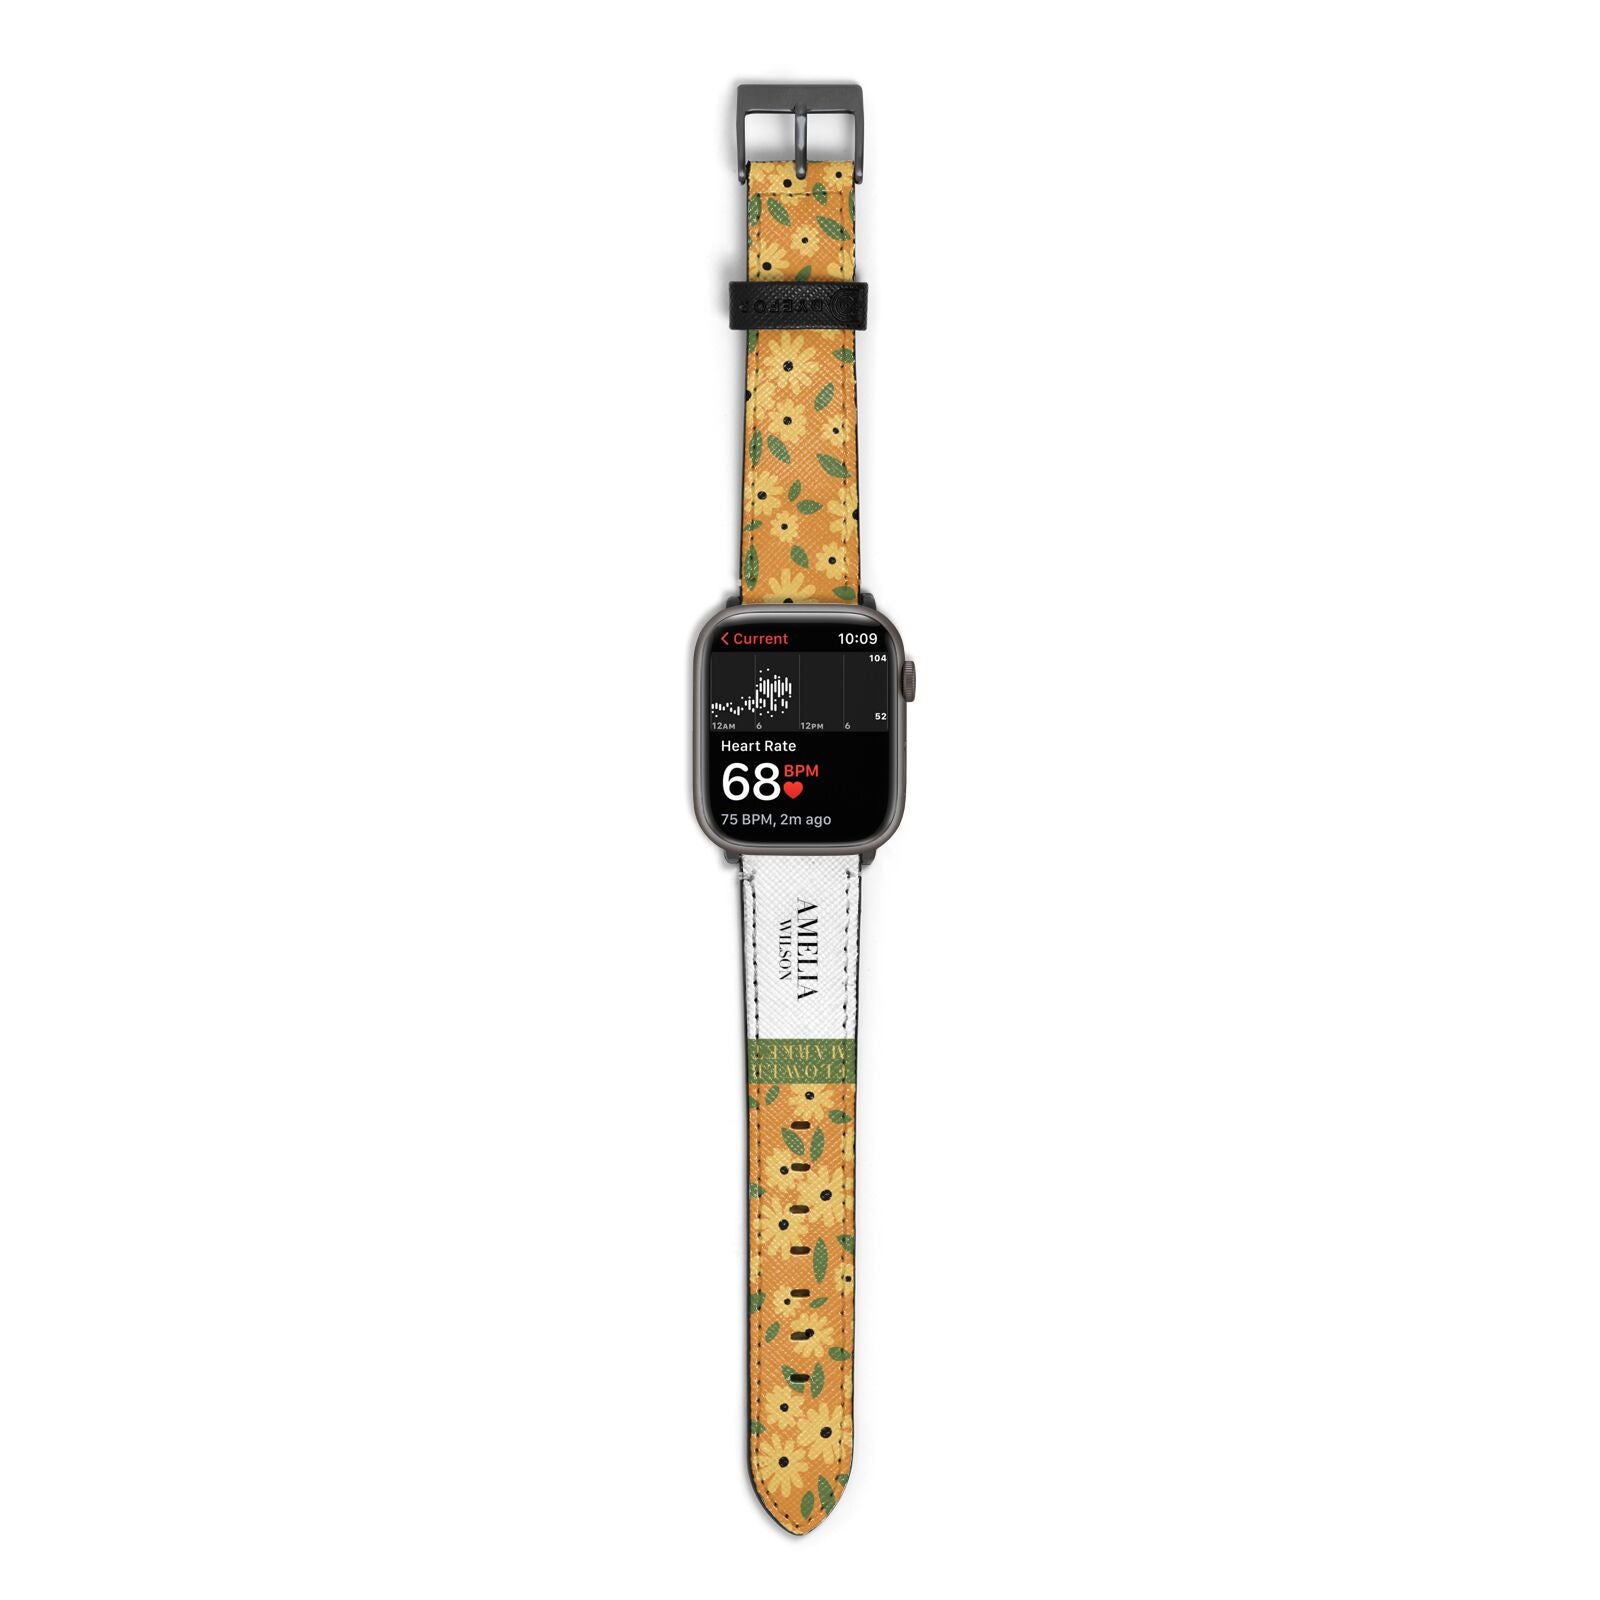 California Flower Market Apple Watch Strap Size 38mm with Space Grey Hardware